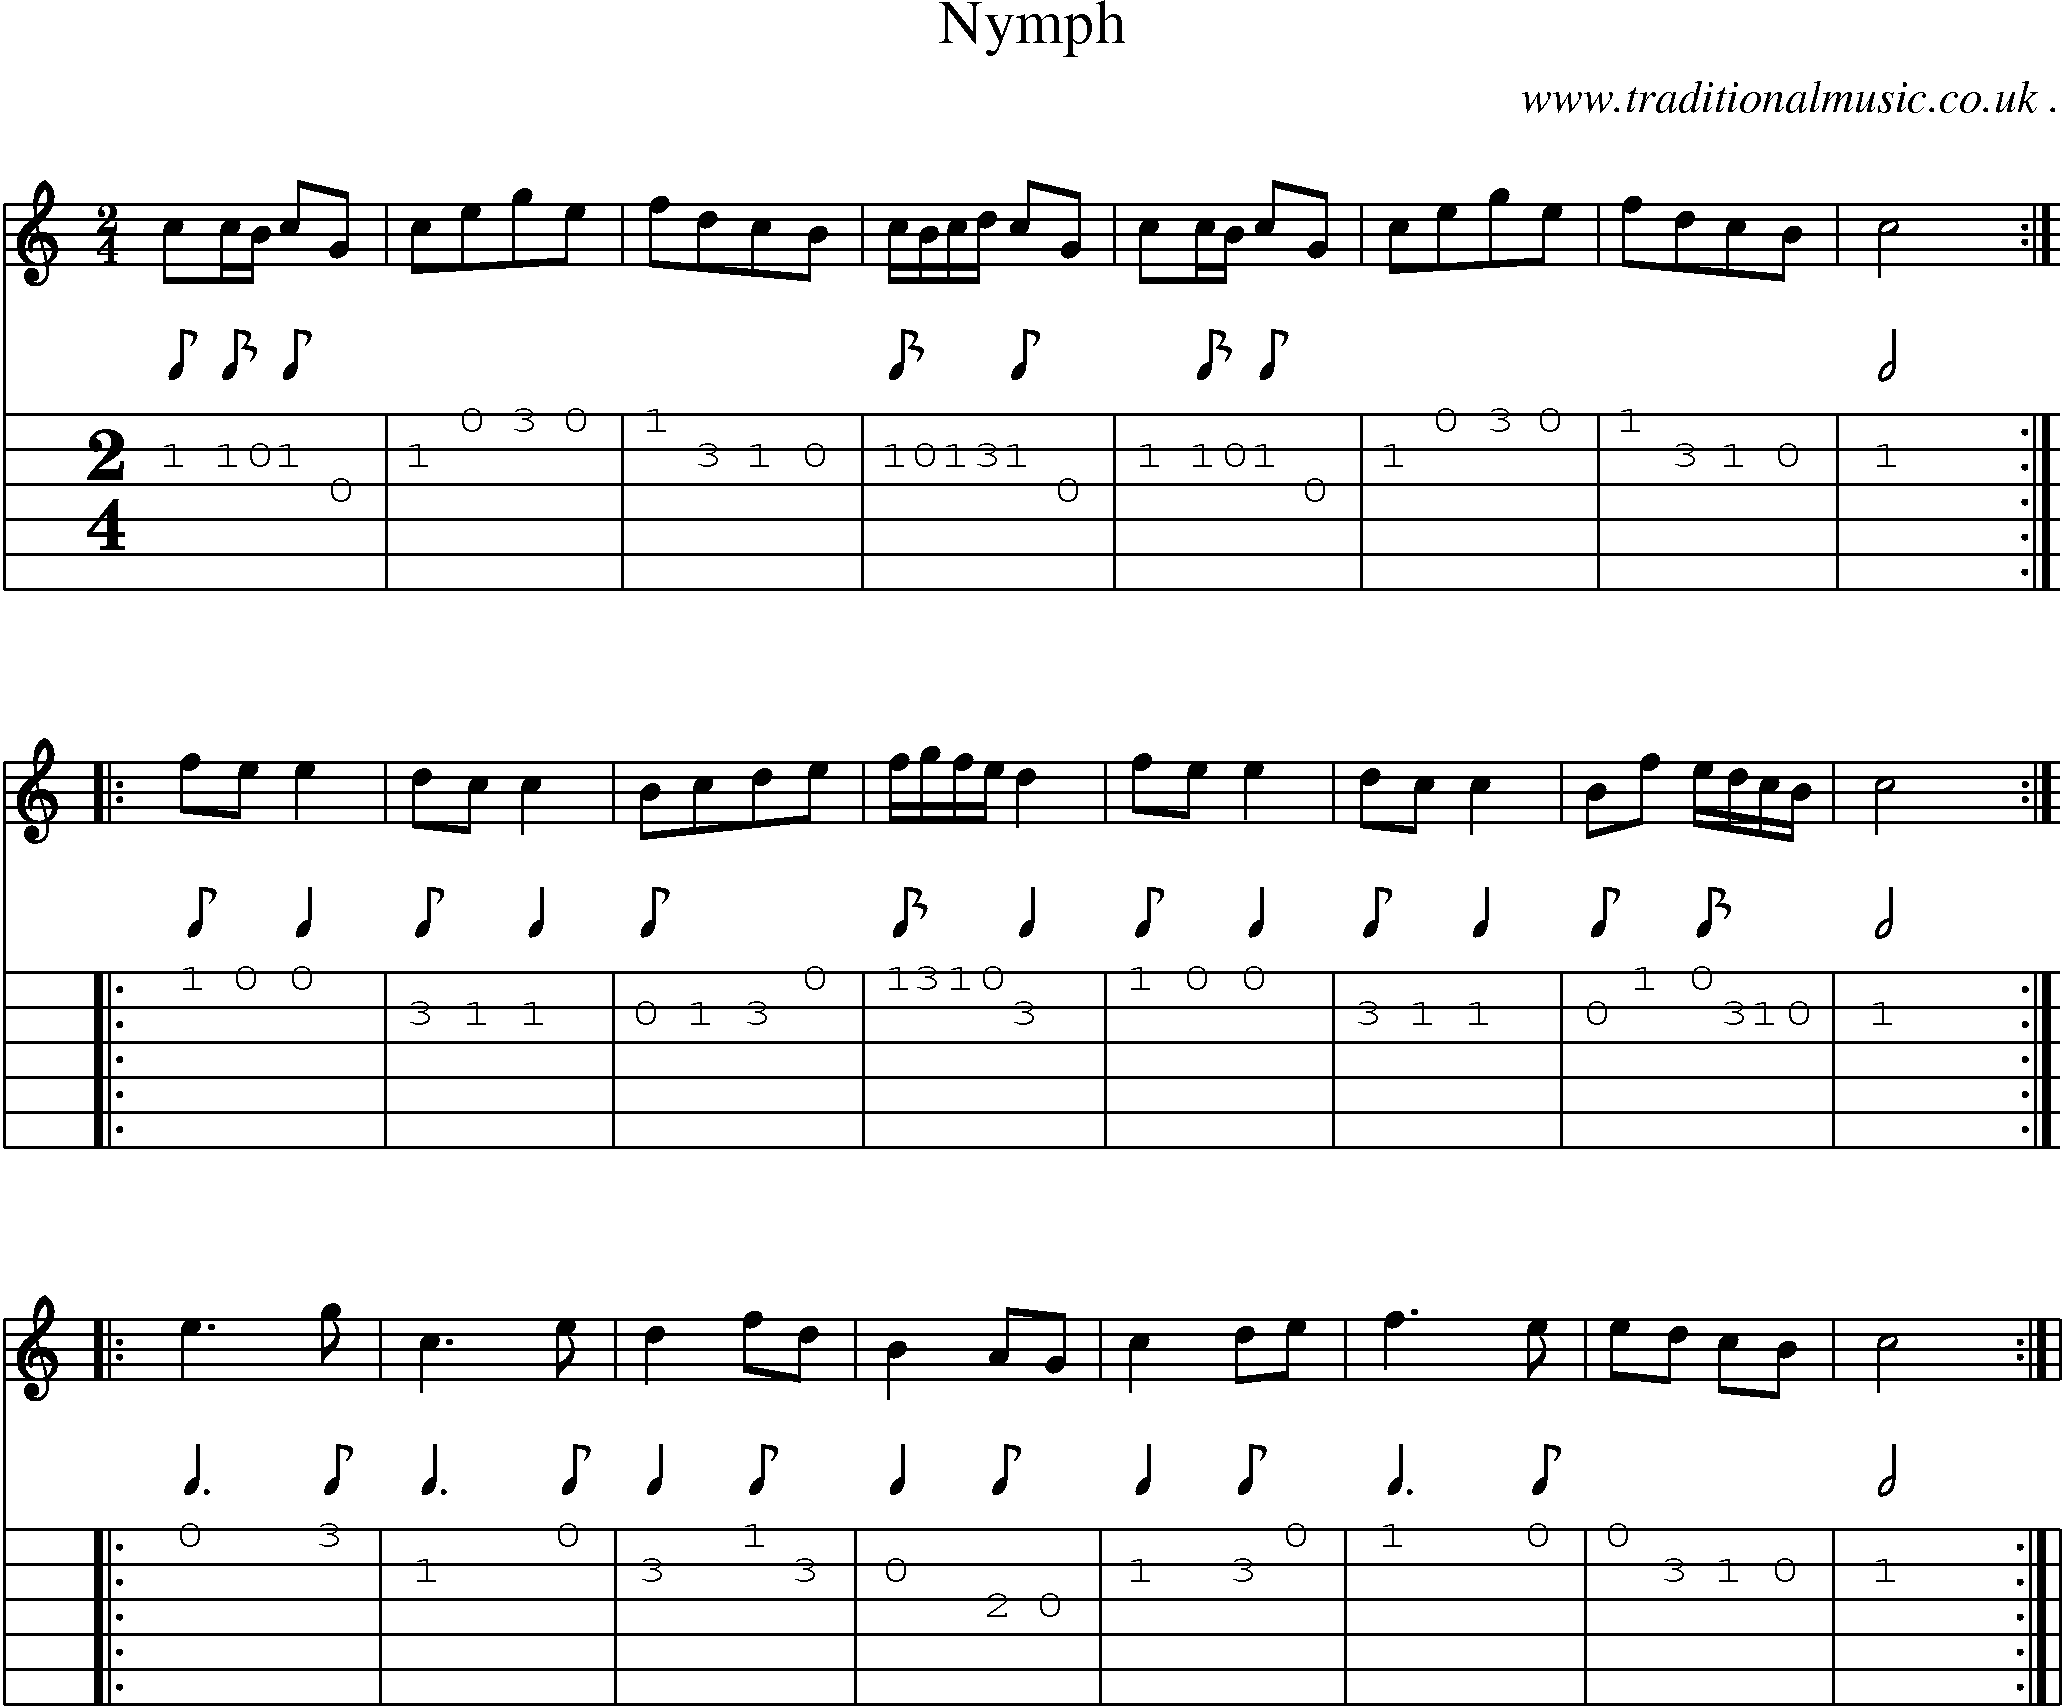 Sheet-Music and Guitar Tabs for Nymph